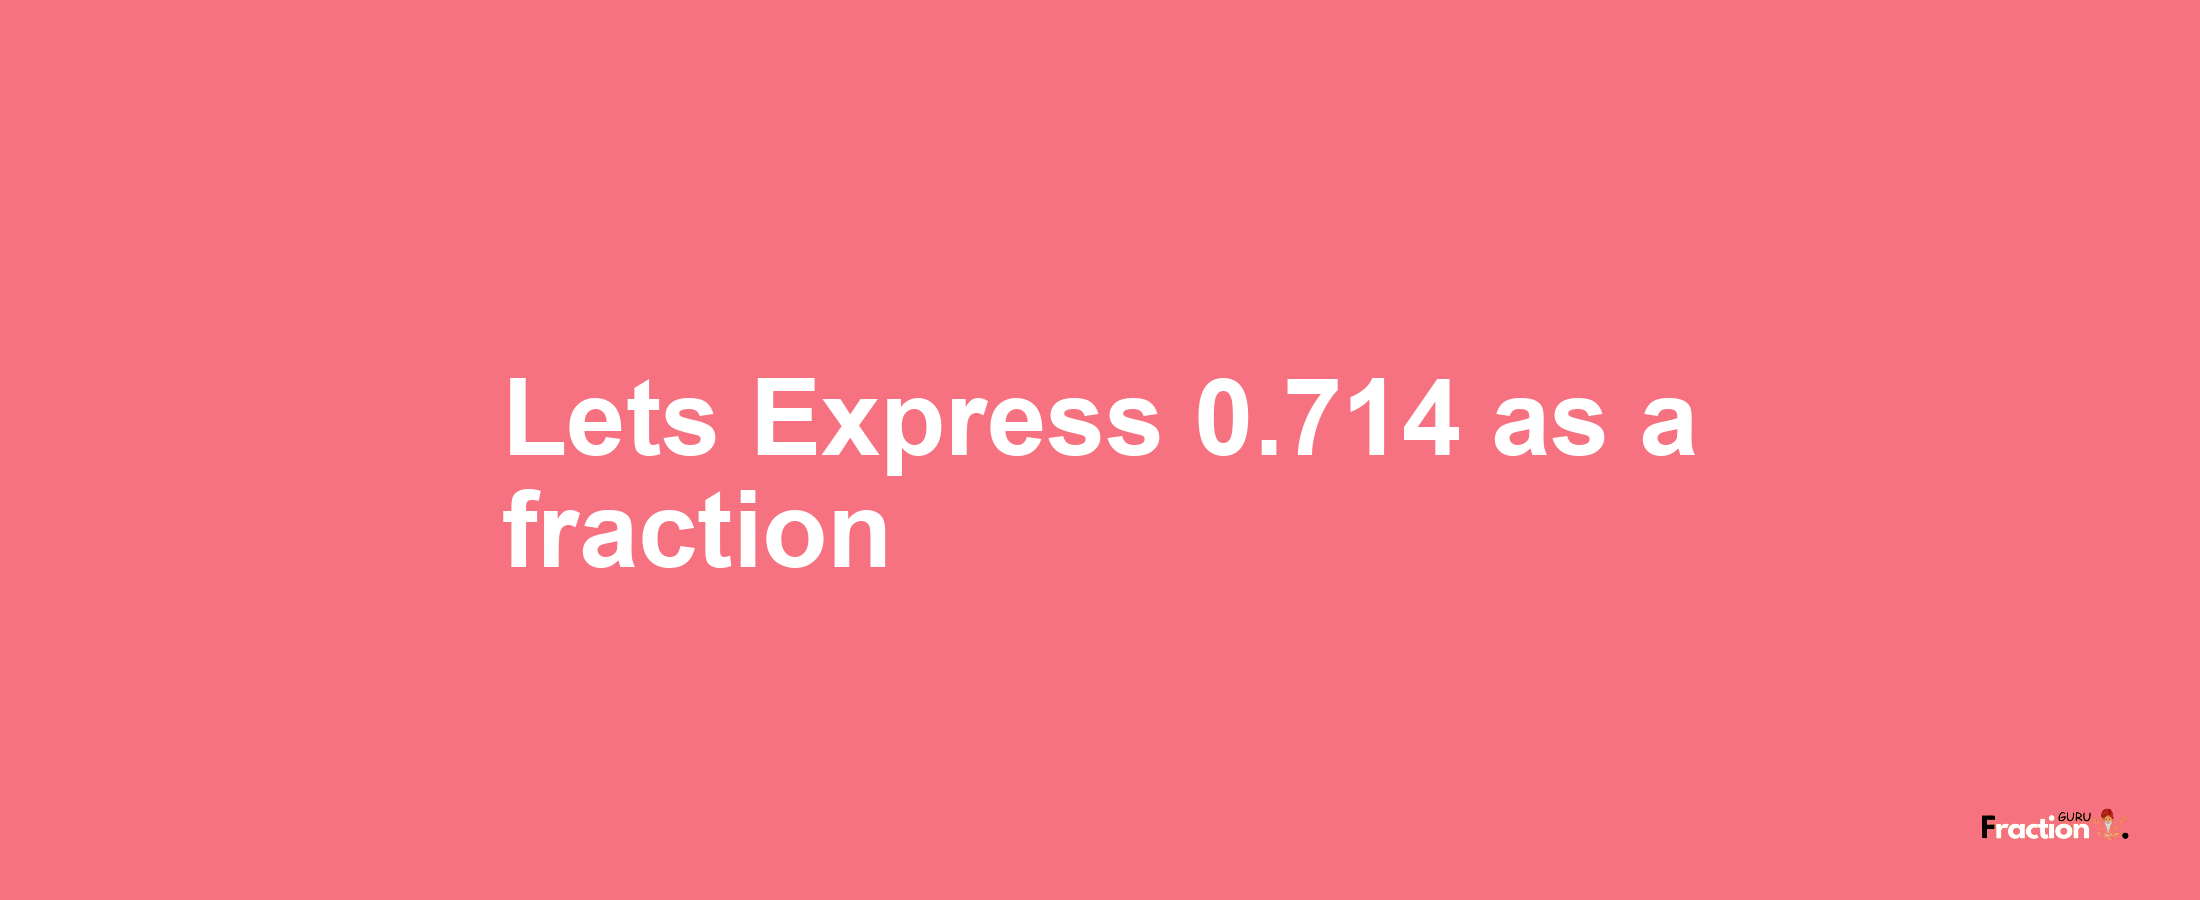 Lets Express 0.714 as afraction